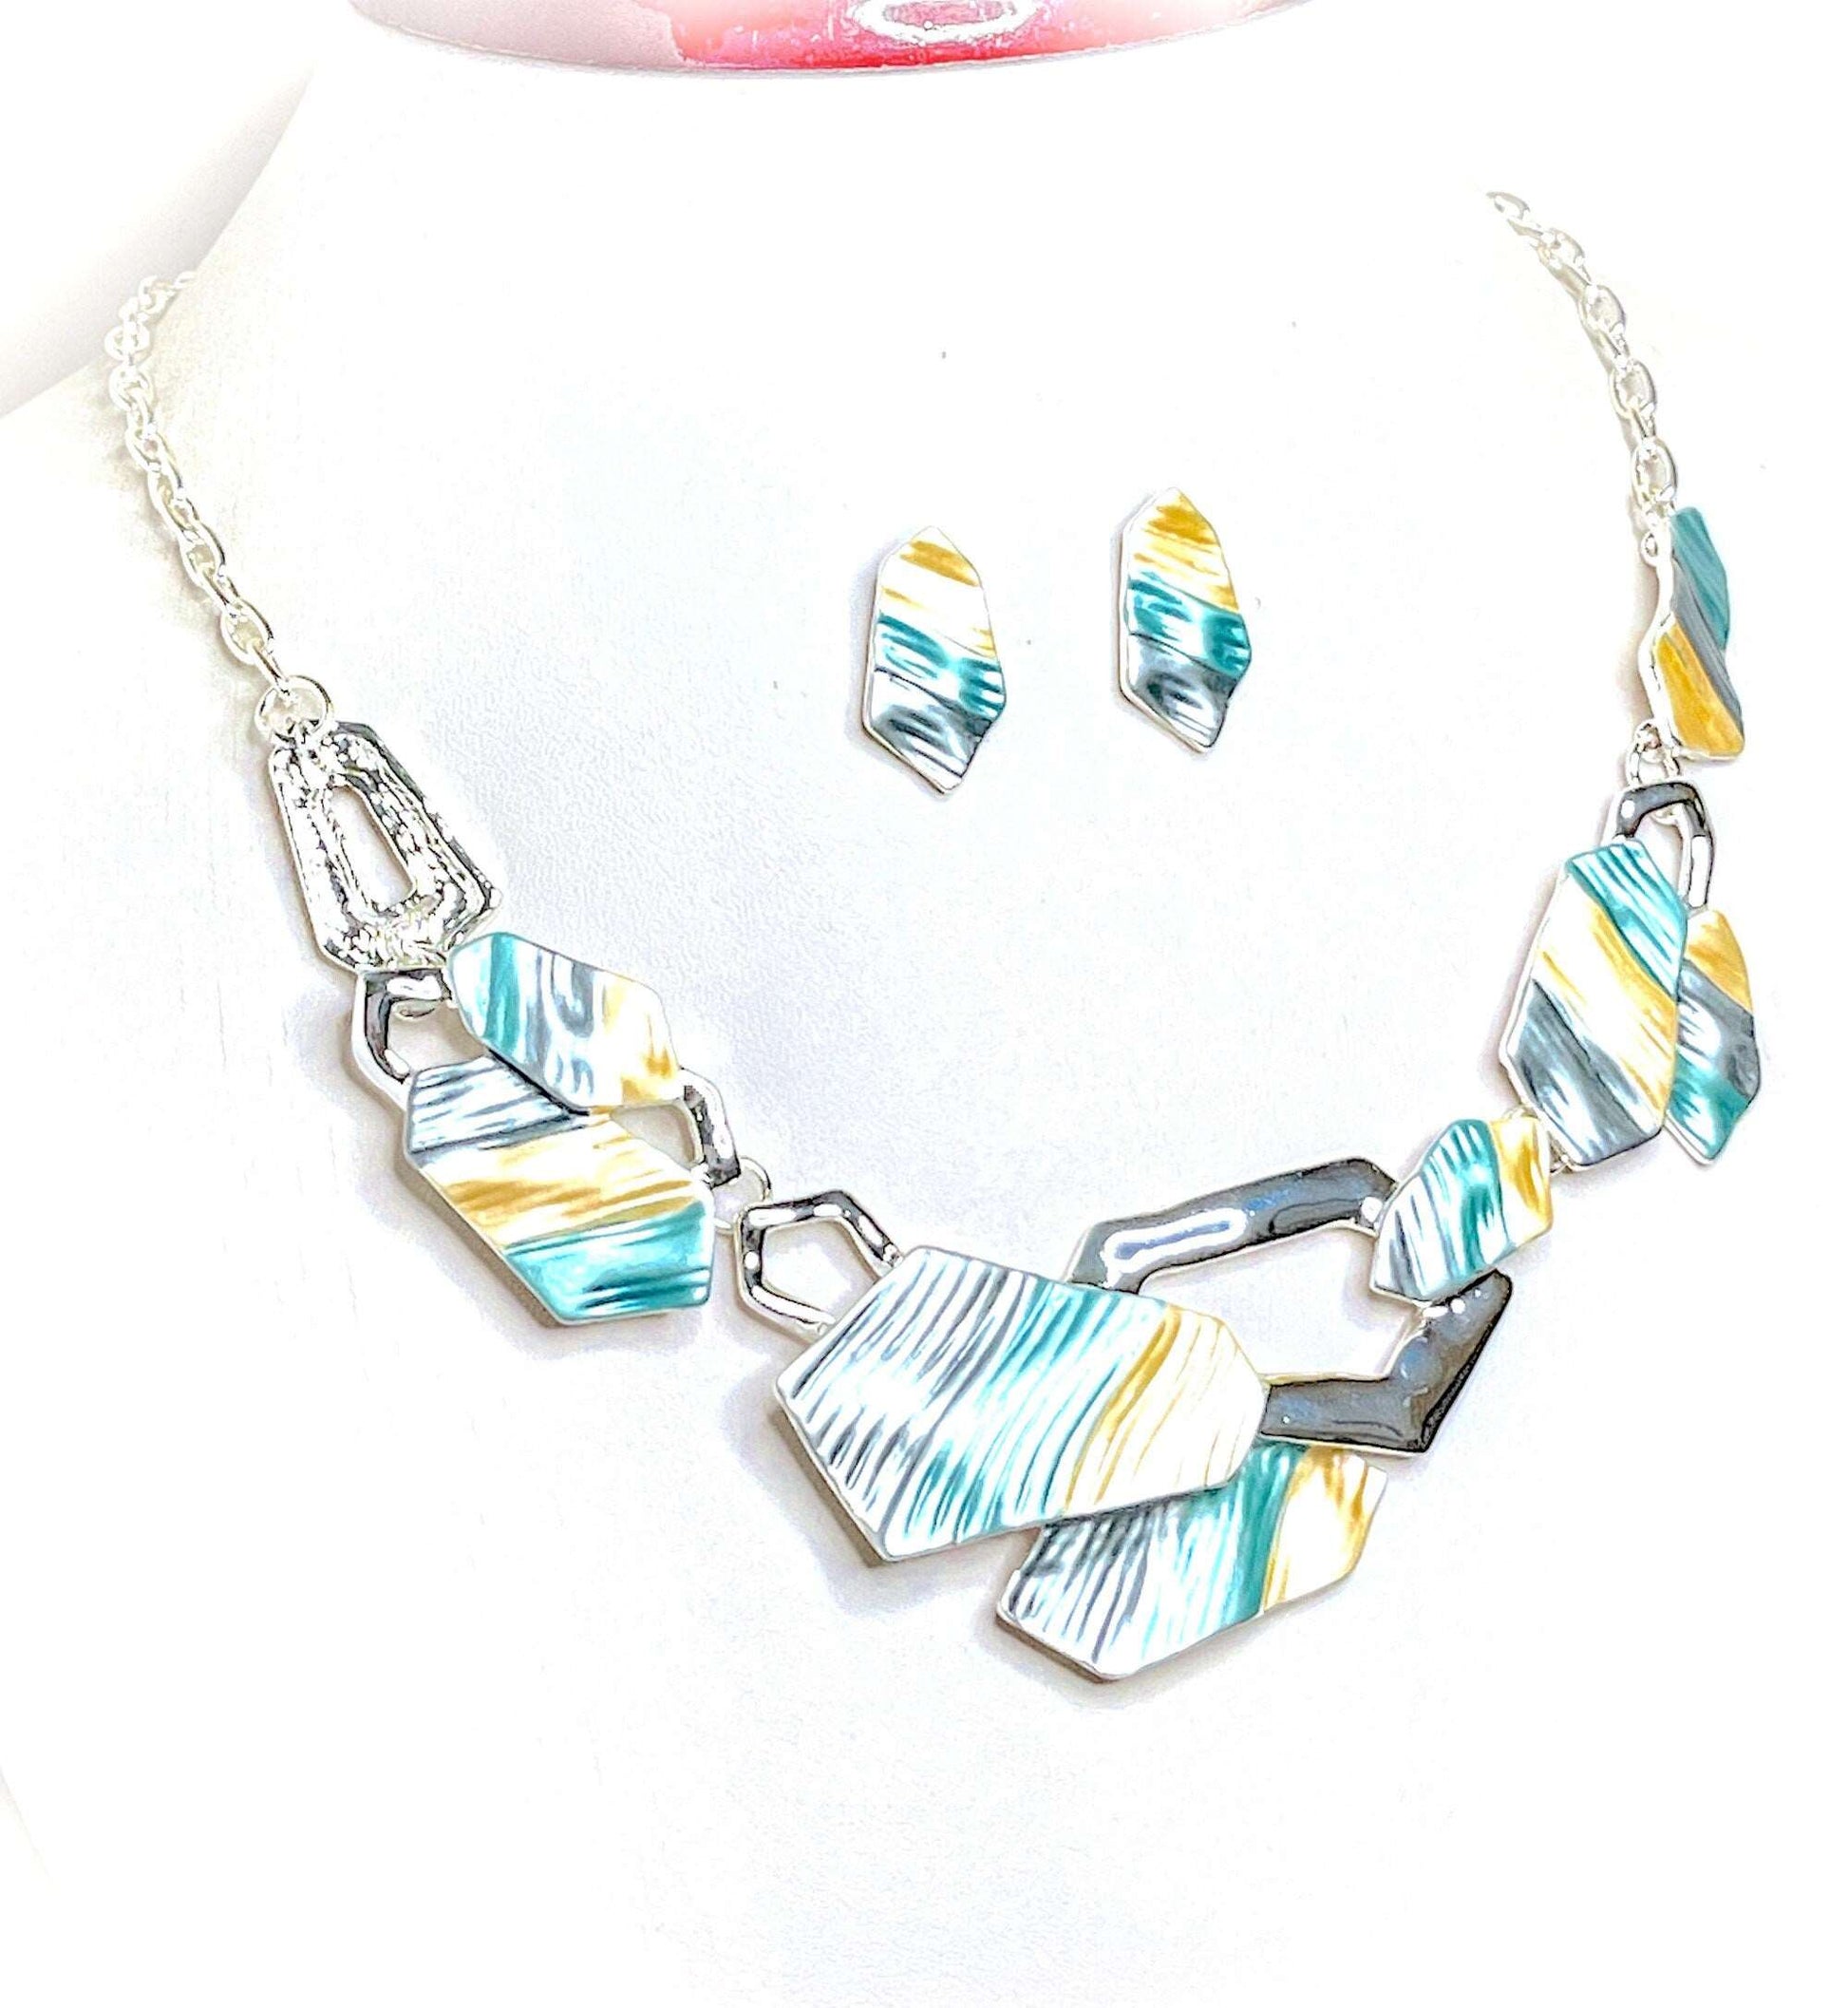 Blue Yellow Silver Geometric Necklace with Earrings Set, Modern Style Jewellery, Pastel Enamel Jewelry, Necklaces for Women